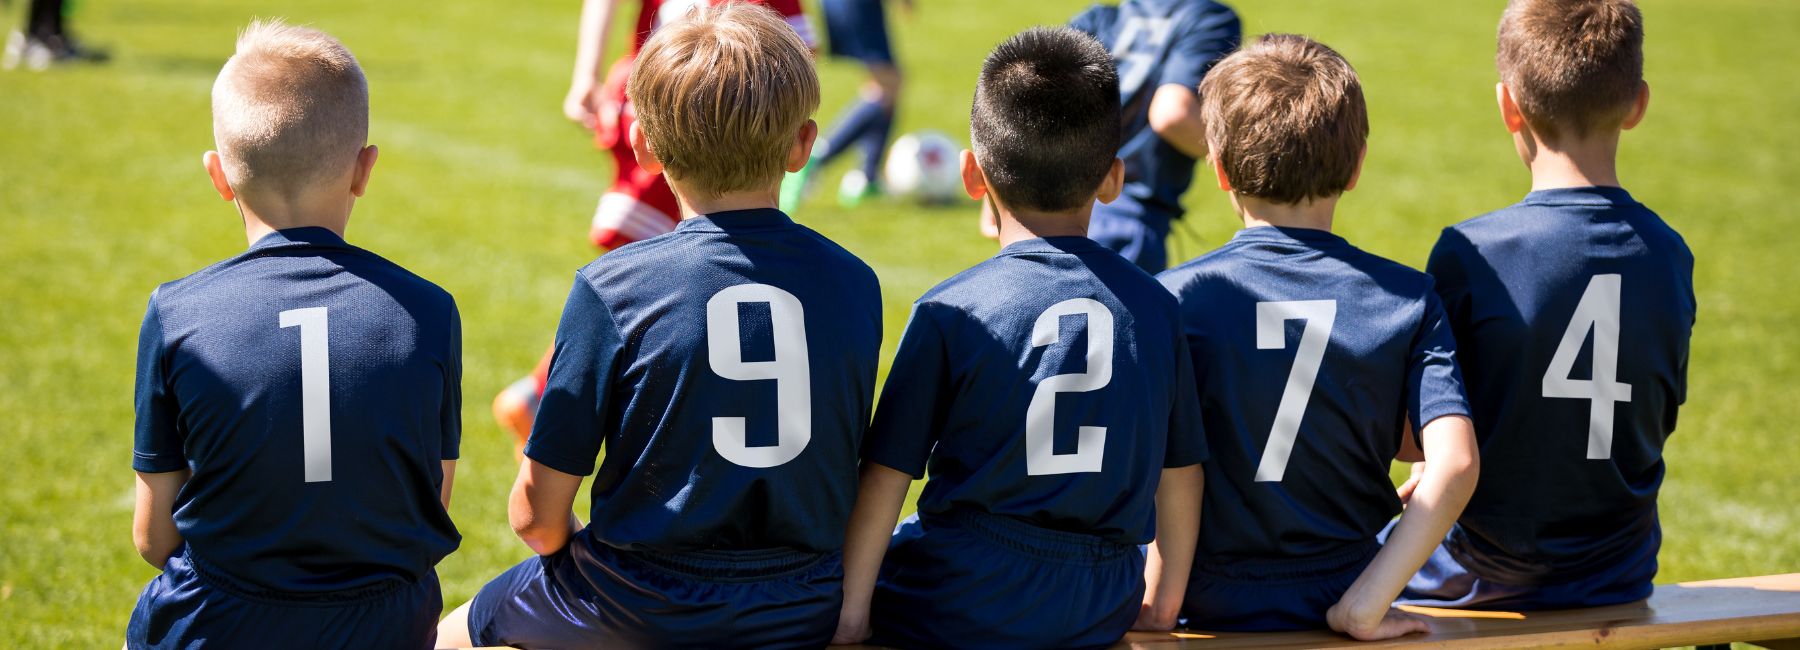 Four youth soccer players sitting on a bench during a game..